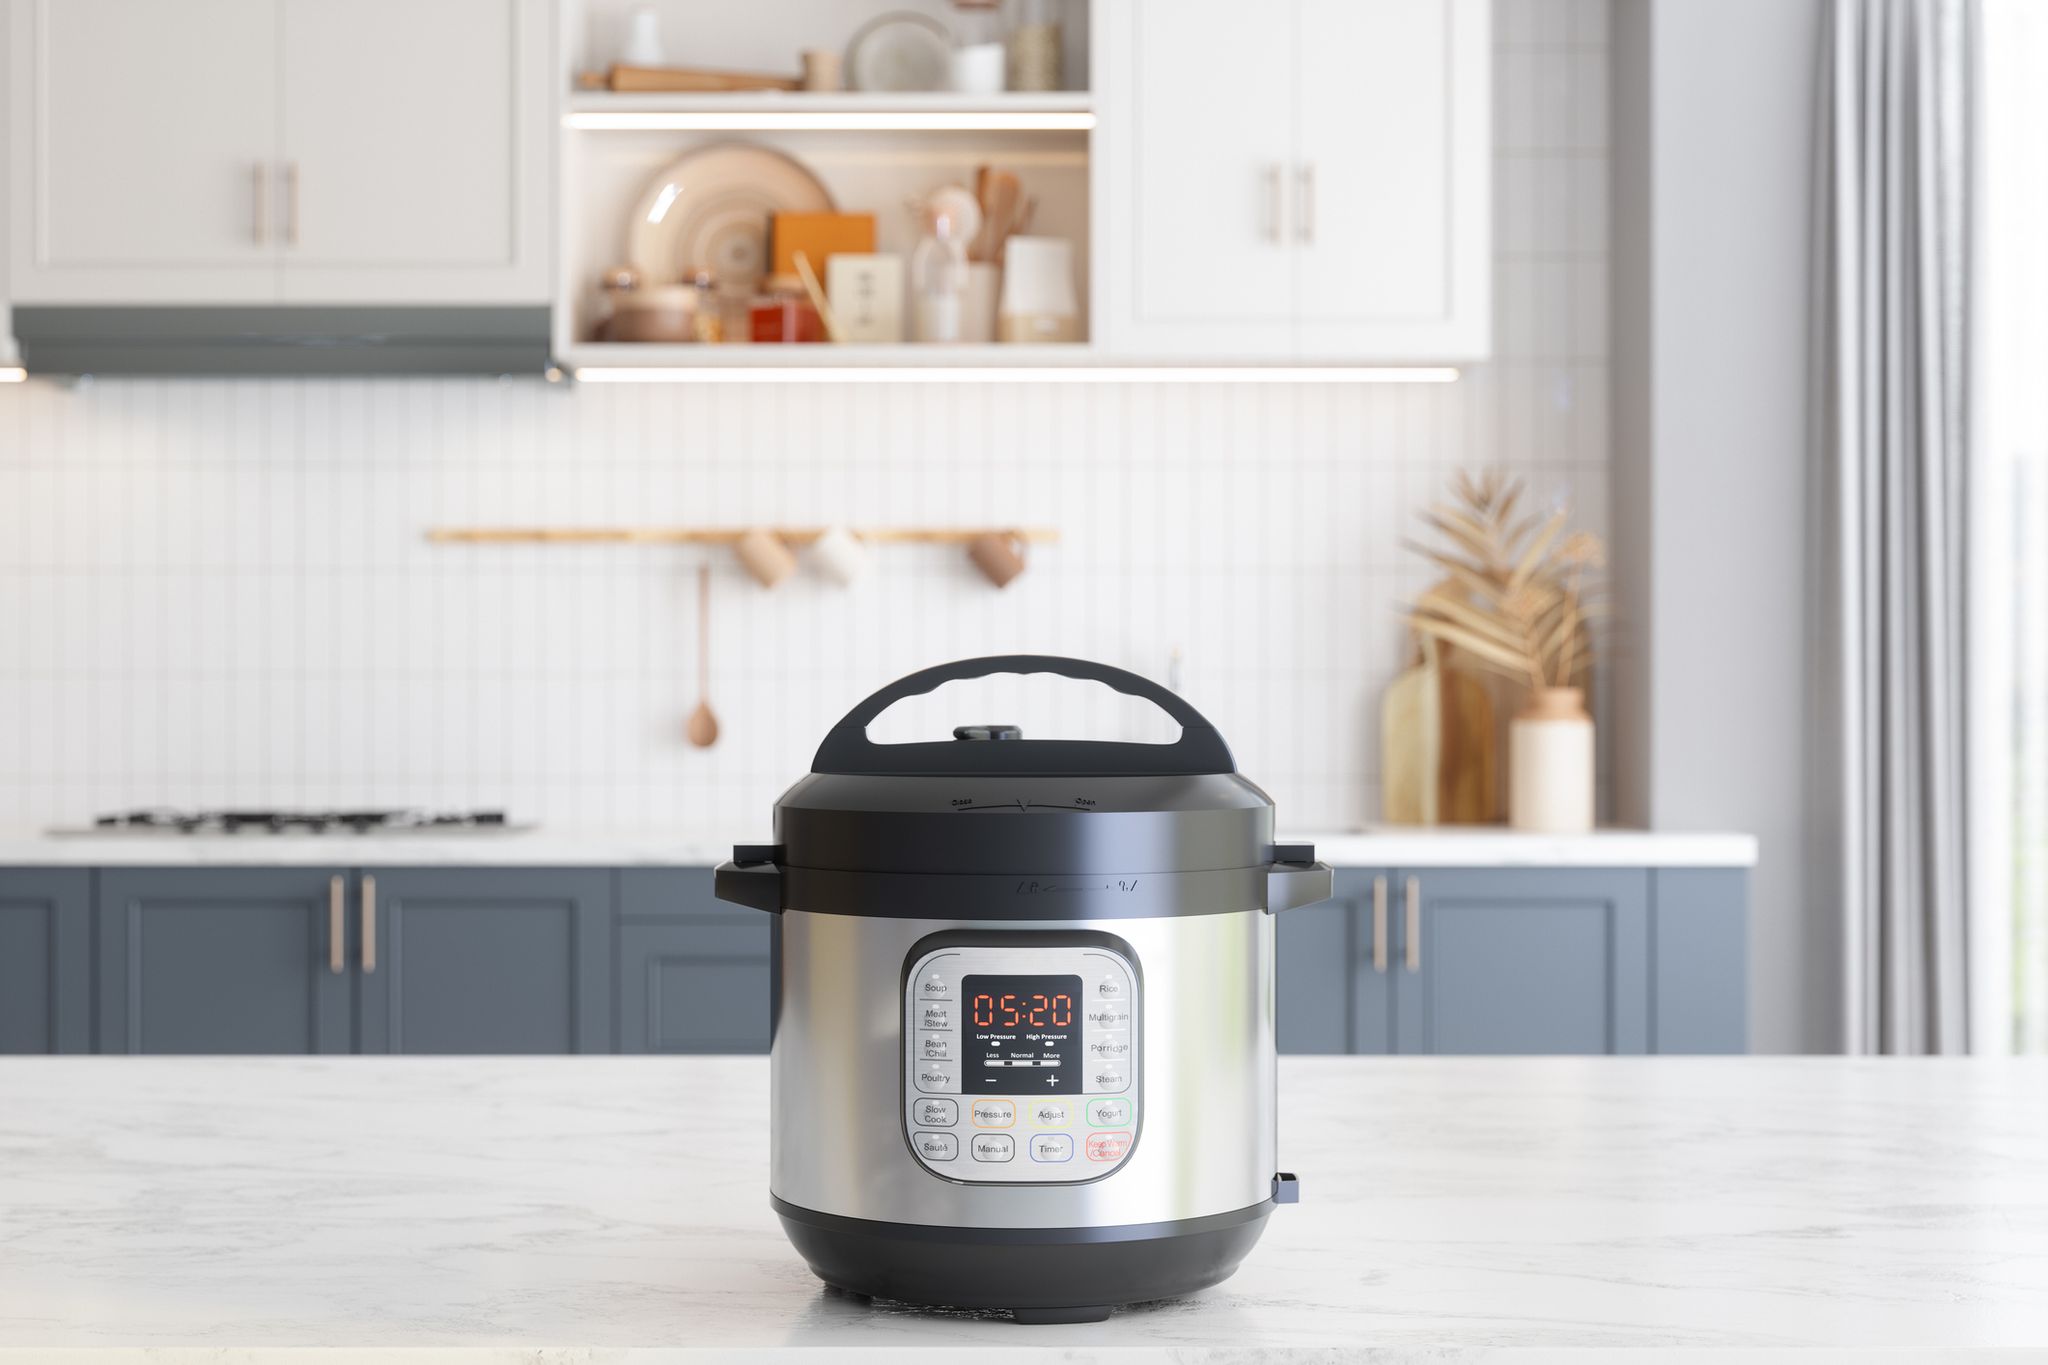 https://hips.hearstapps.com/hmg-prod/images/multi-cooker-on-empty-marble-surface-with-blurred-royalty-free-image-1697135100.jpg?resize=2048:*